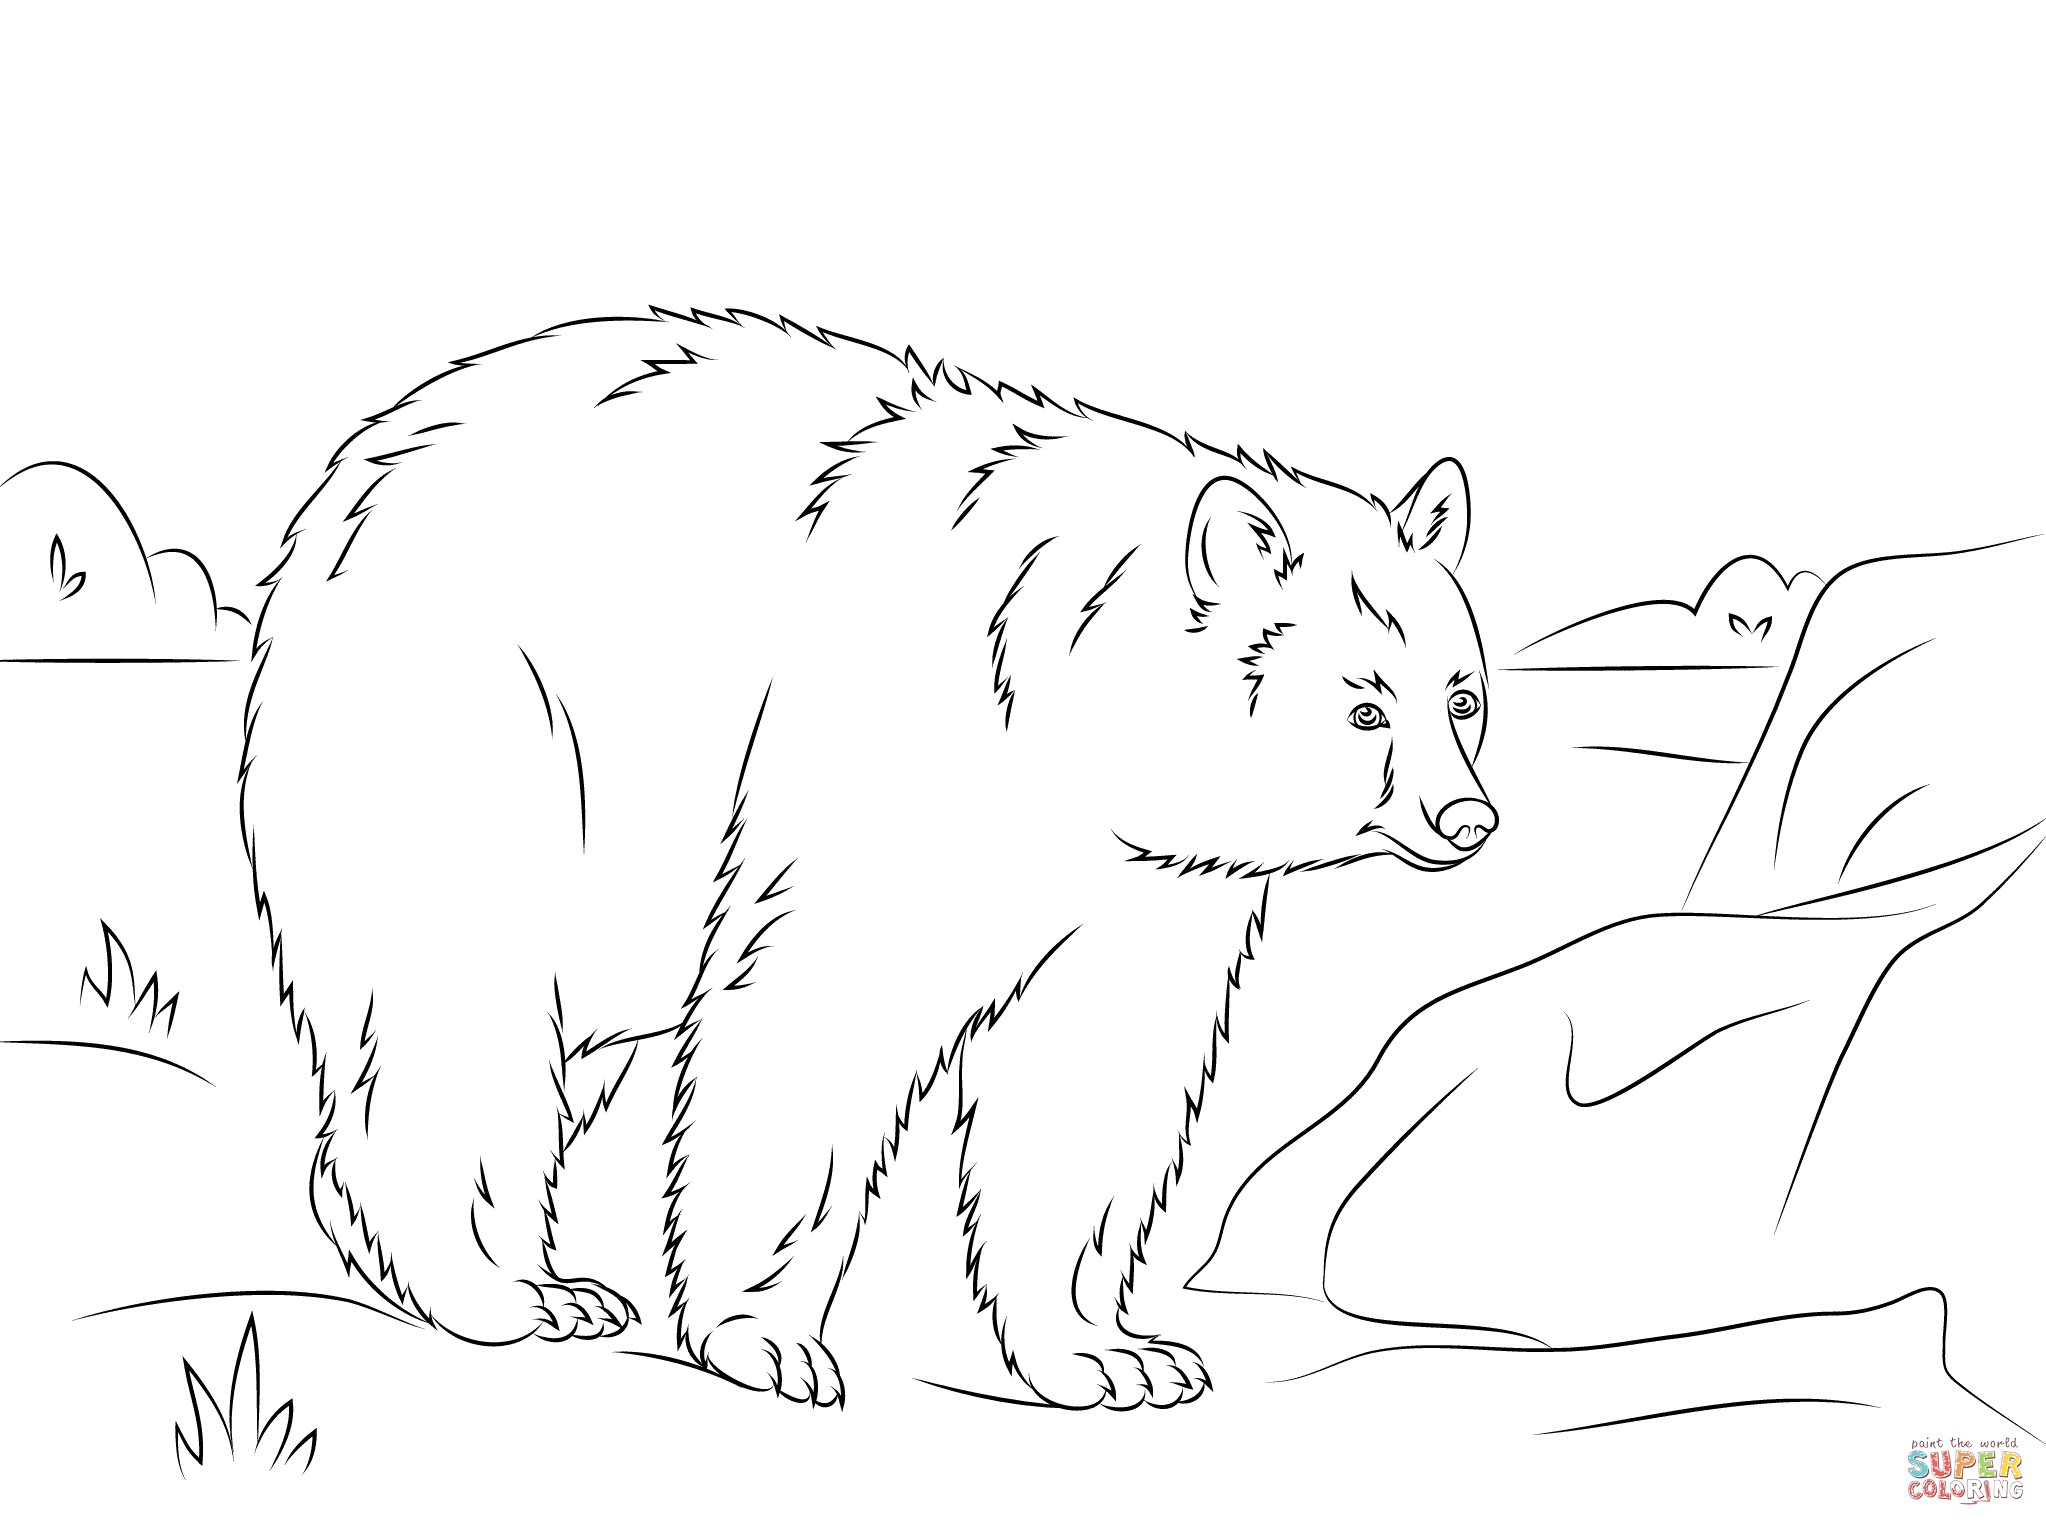 Black Bear Coloring Pages Printable | Coloring Pages For All Ages